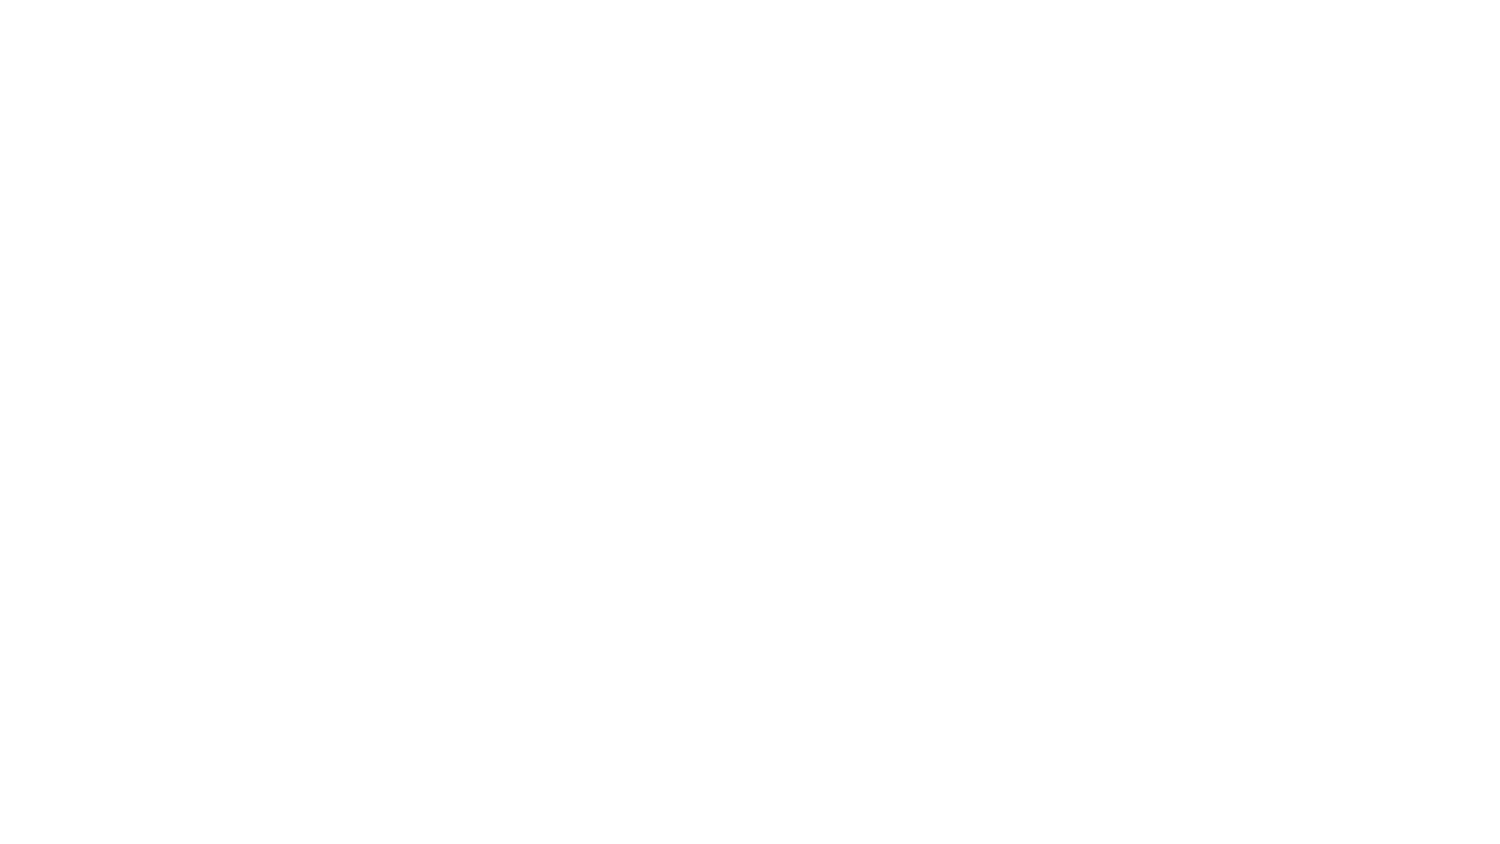 Tremblays Xperience